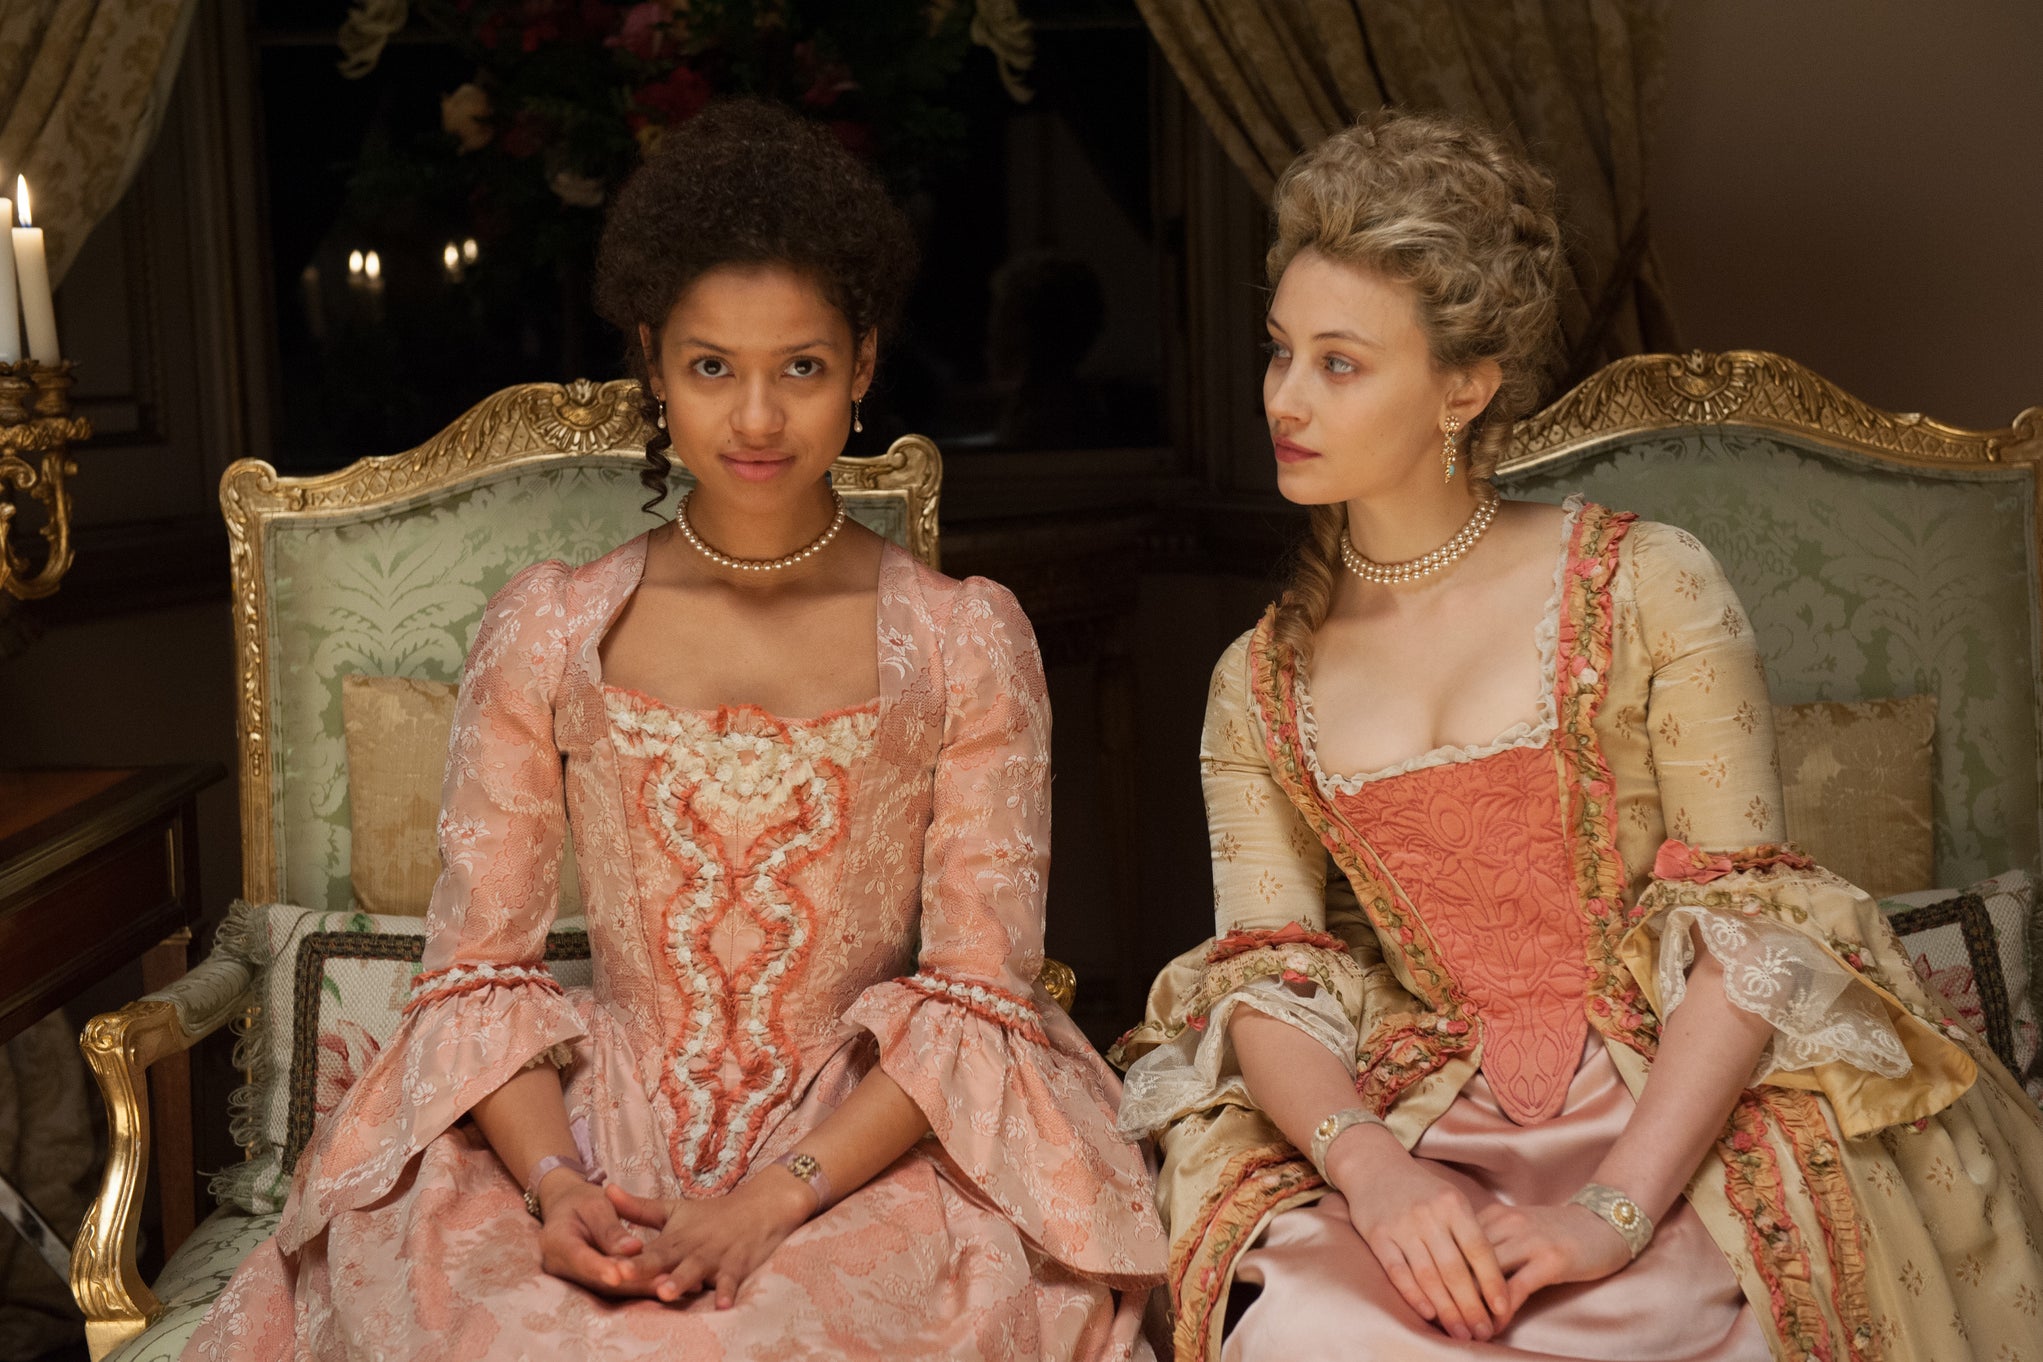 In 18th century England, a young Black woman dressed in Georgian Era garb, looks ahead with a slight smile on her face, as she sits in an ornate drawing room next to a young white woman, also dressed in Georgian Era garb, who is looking at her with curiosity. 